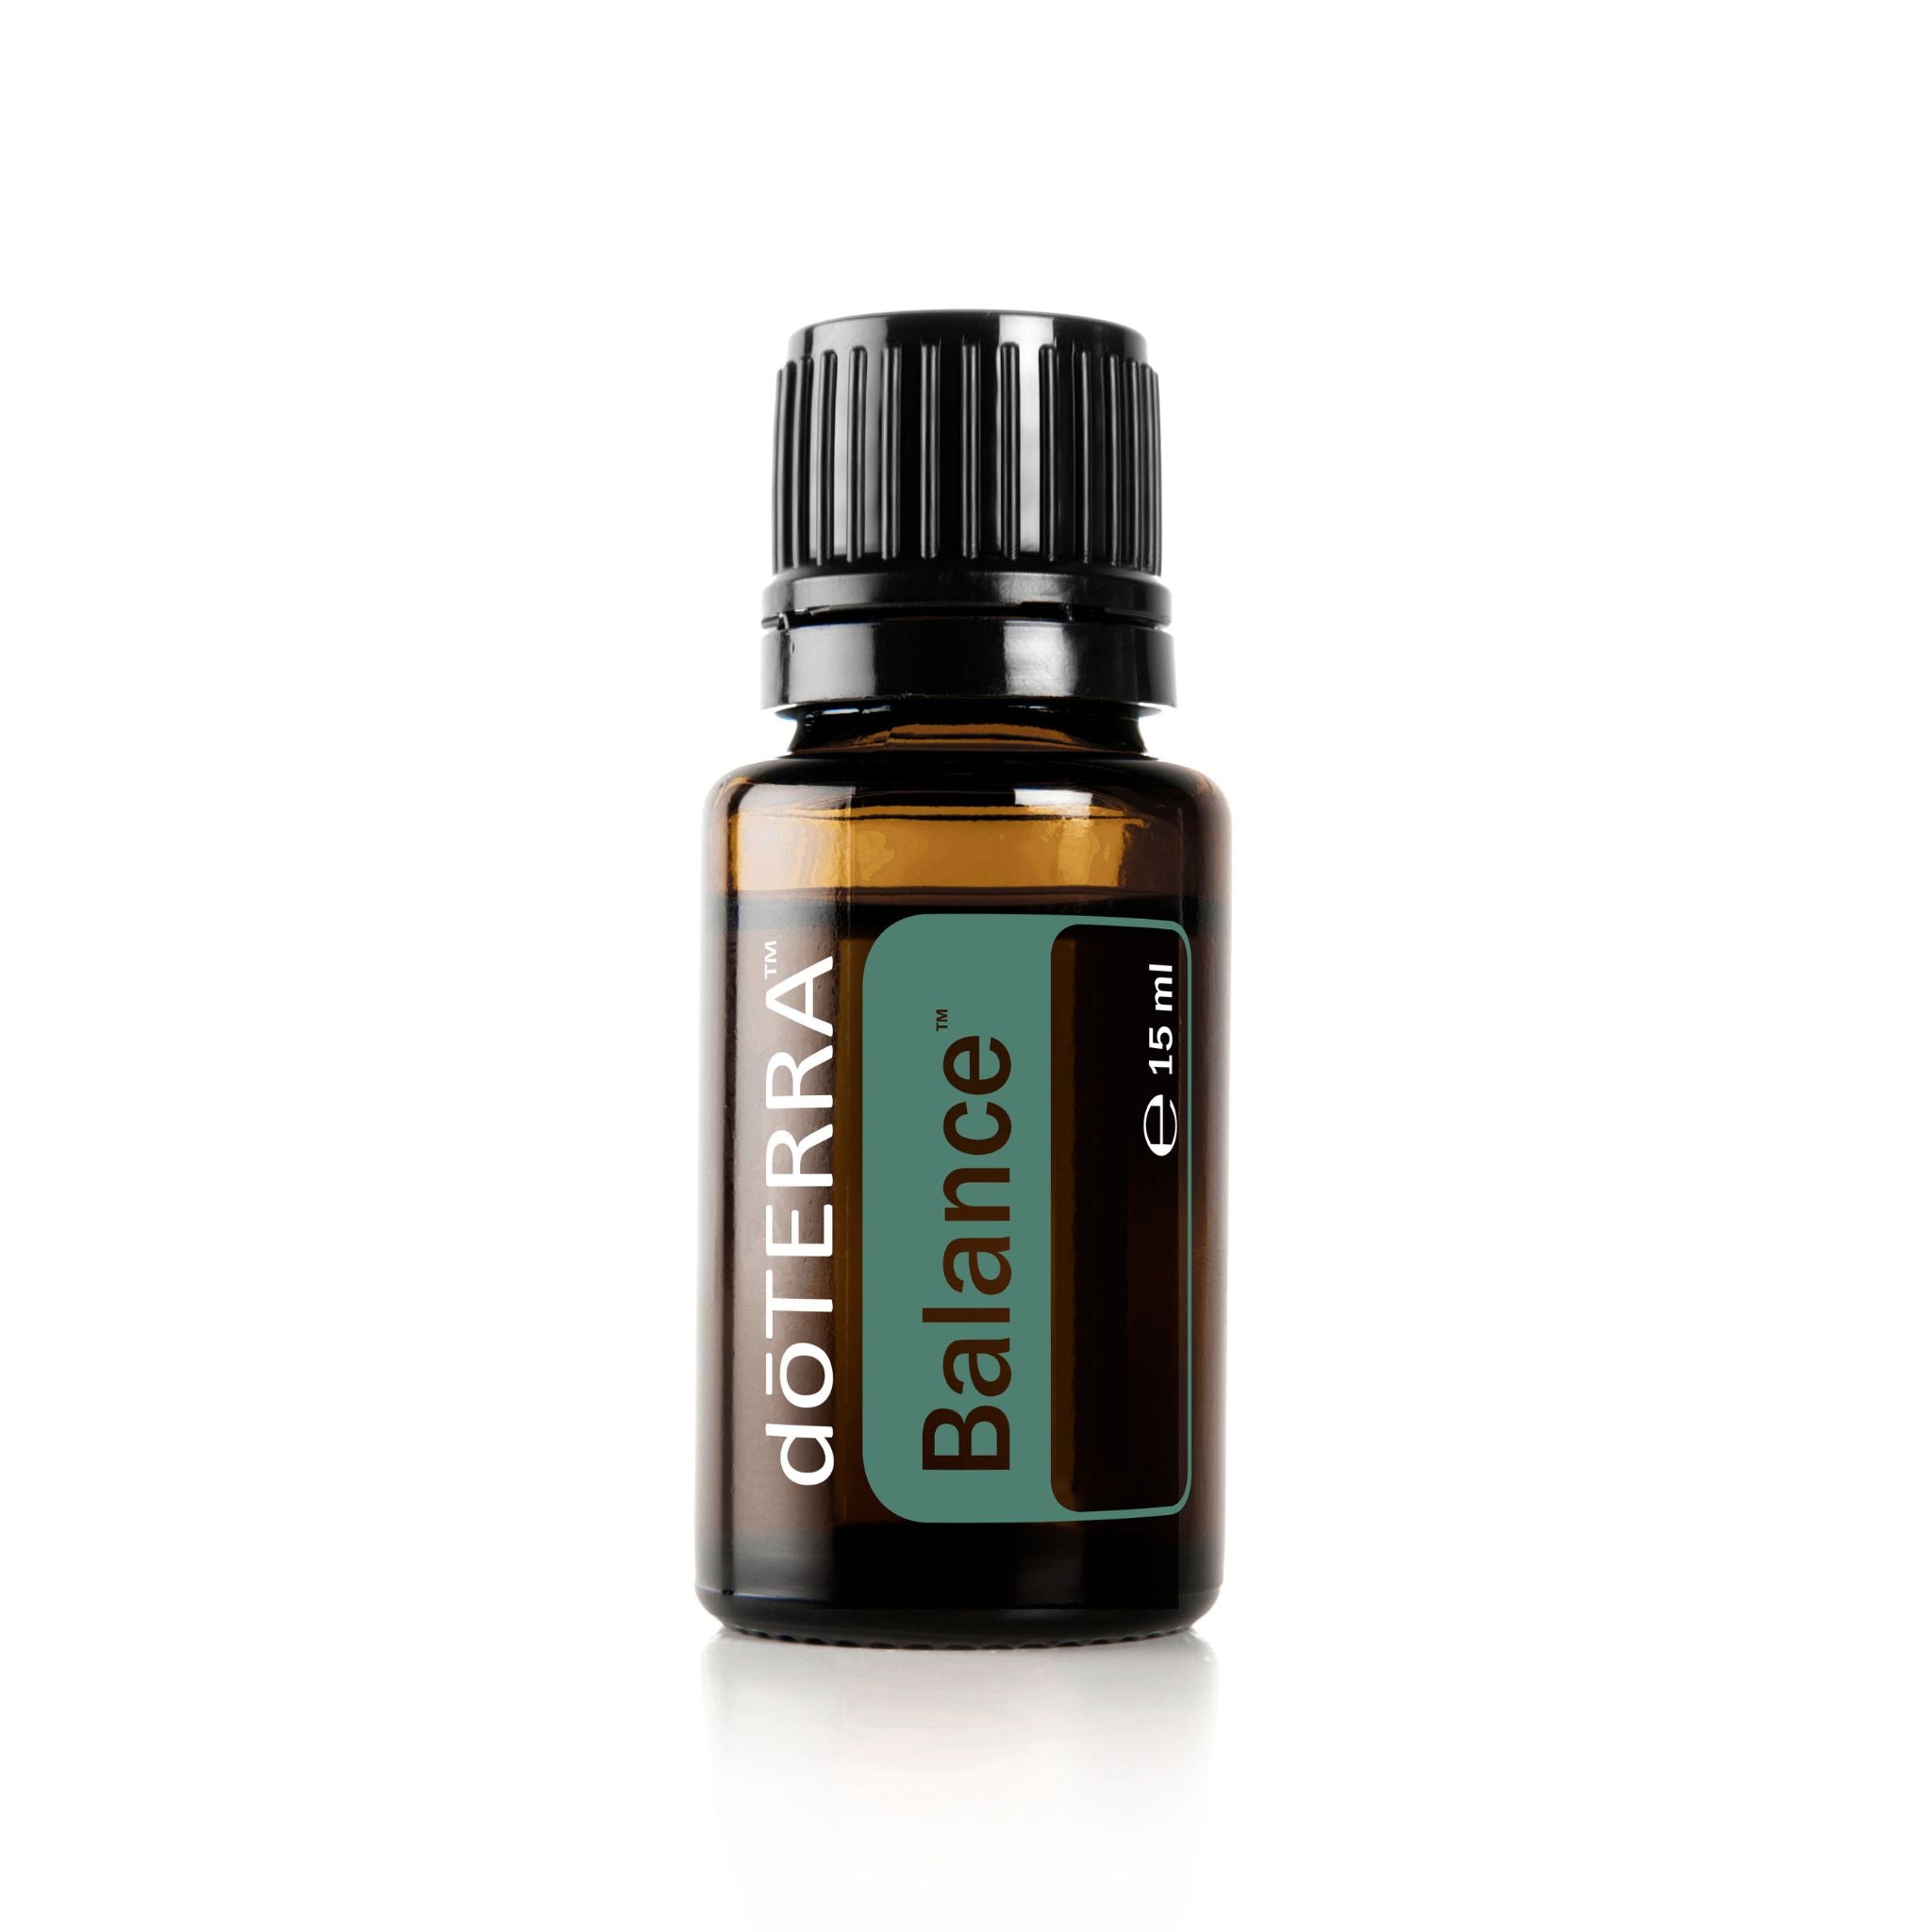 Balance essential oil promotes calm, relaxation, and well-being. Glass bottle, yellow color, 15 ml